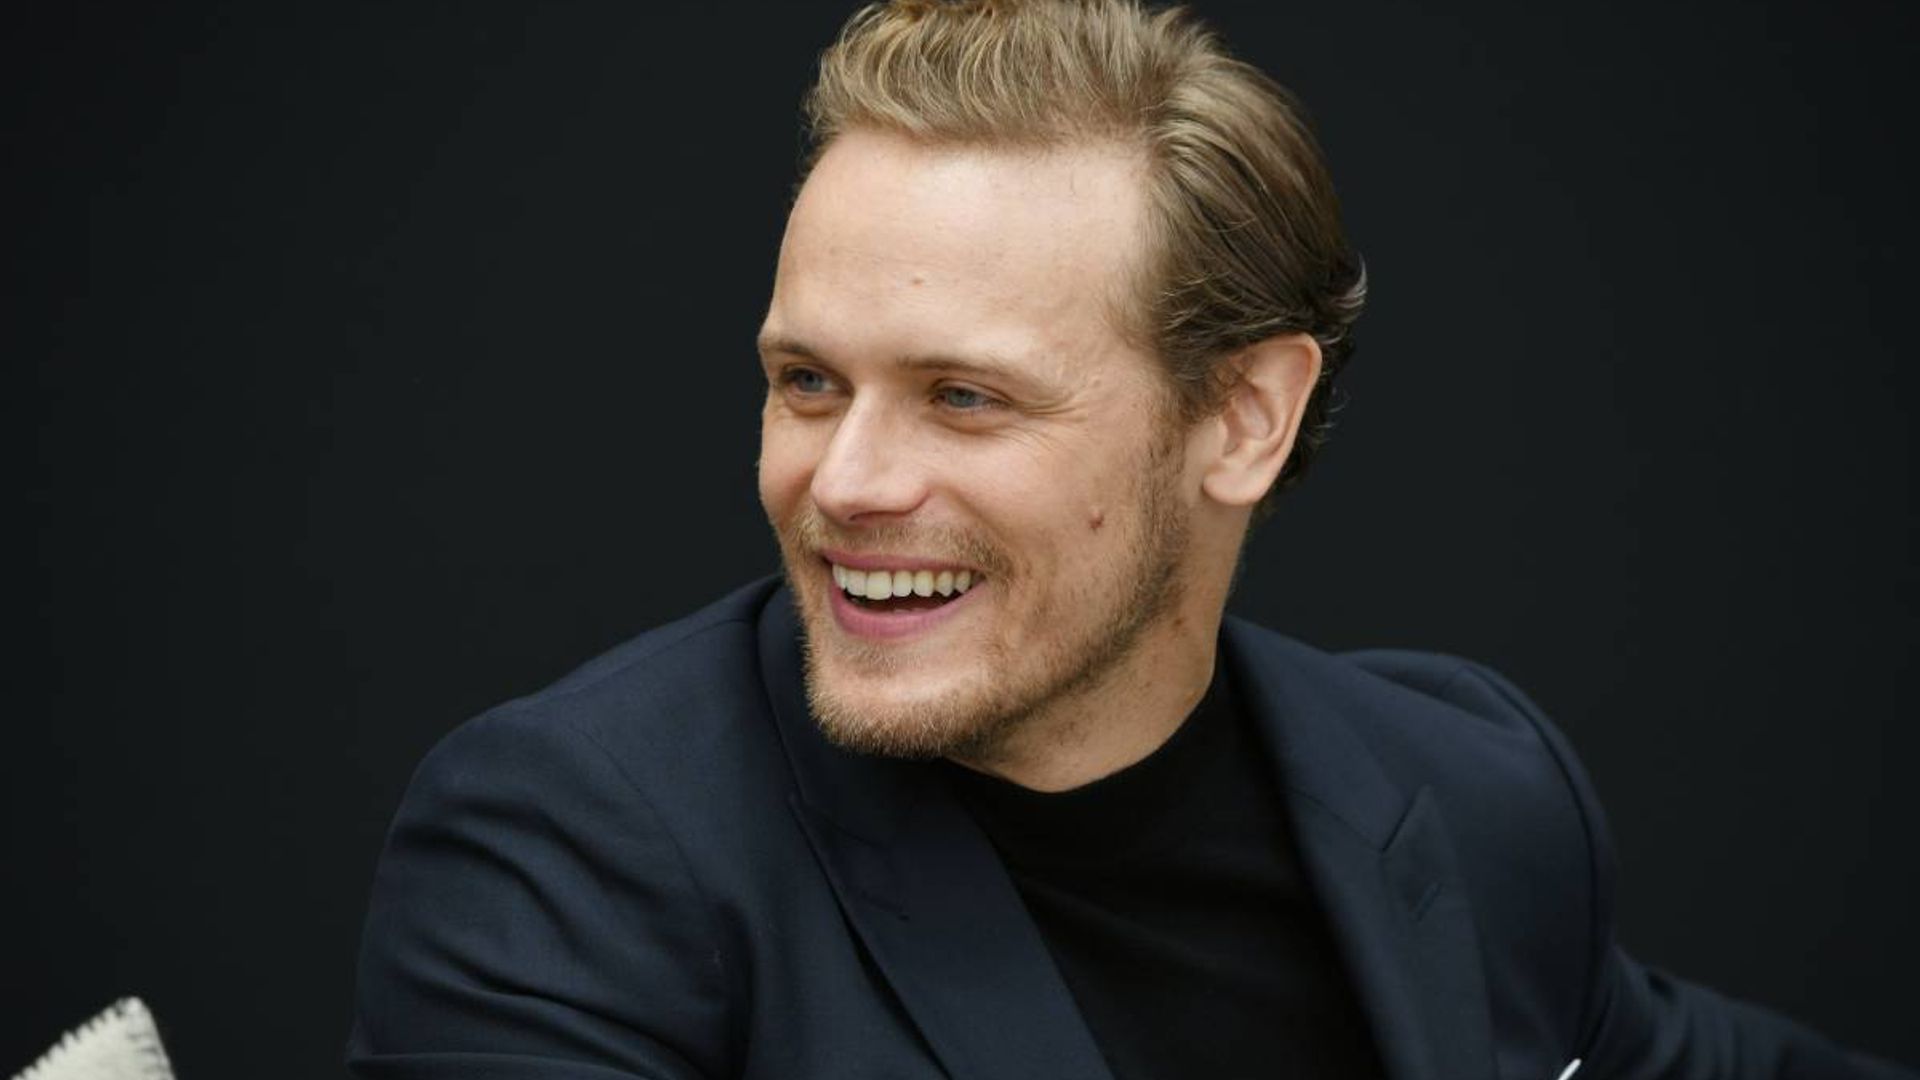 Sam Heughan marks exciting news with new photos - fans react!